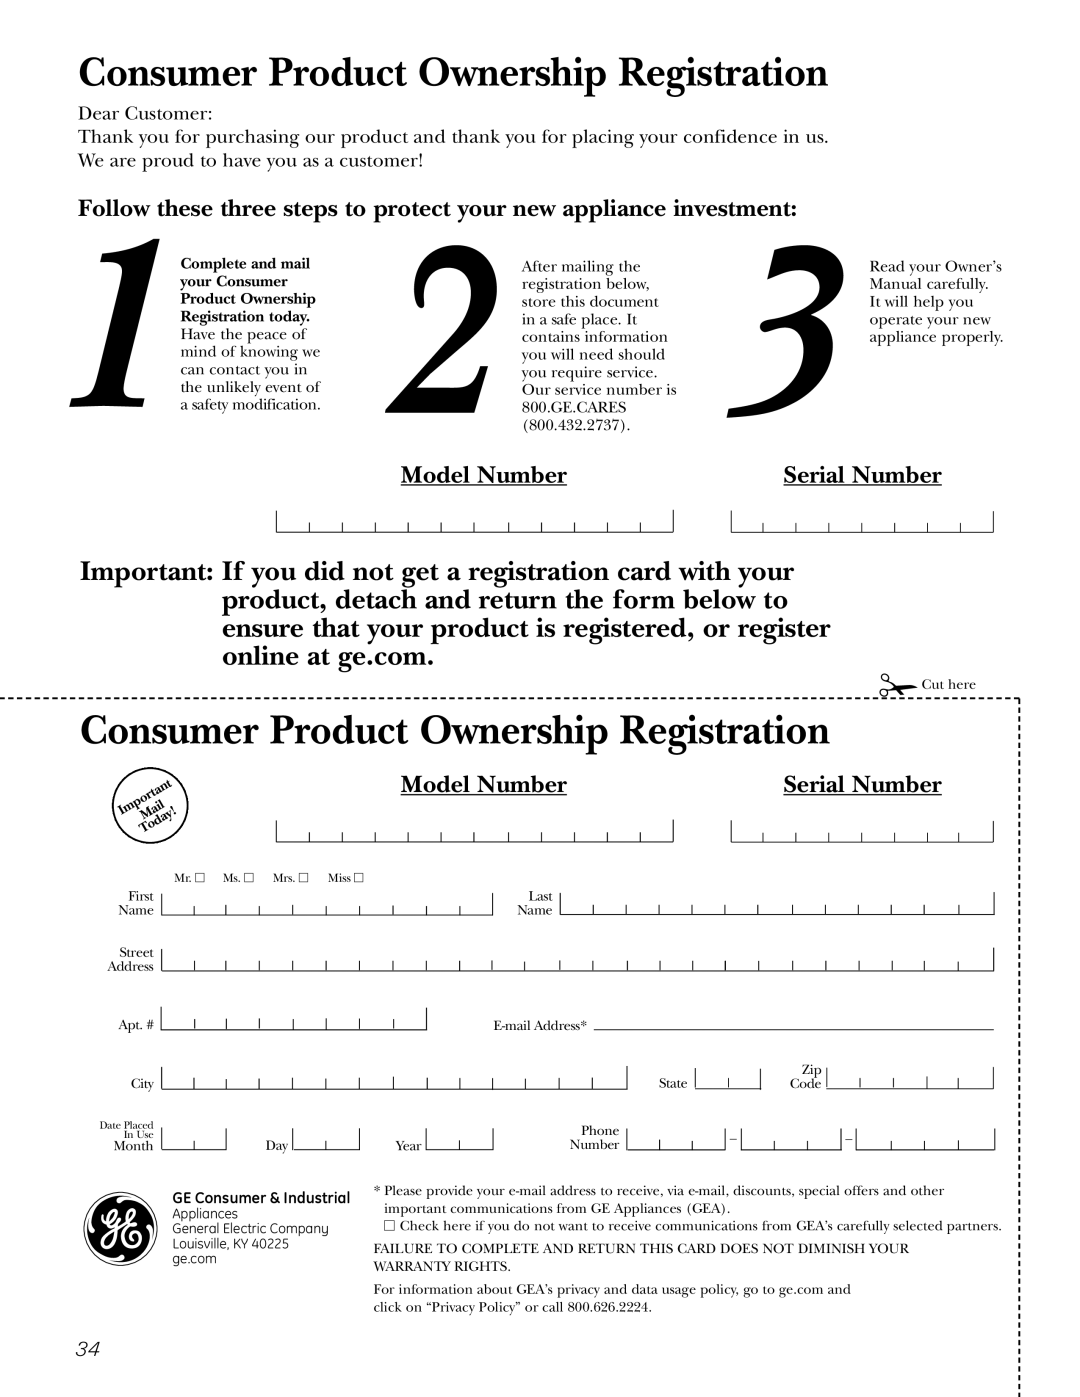 GE 22, 23, 25, 27 installation instructions Model Number, Serial Number, Consumer Product Ownership Registration 